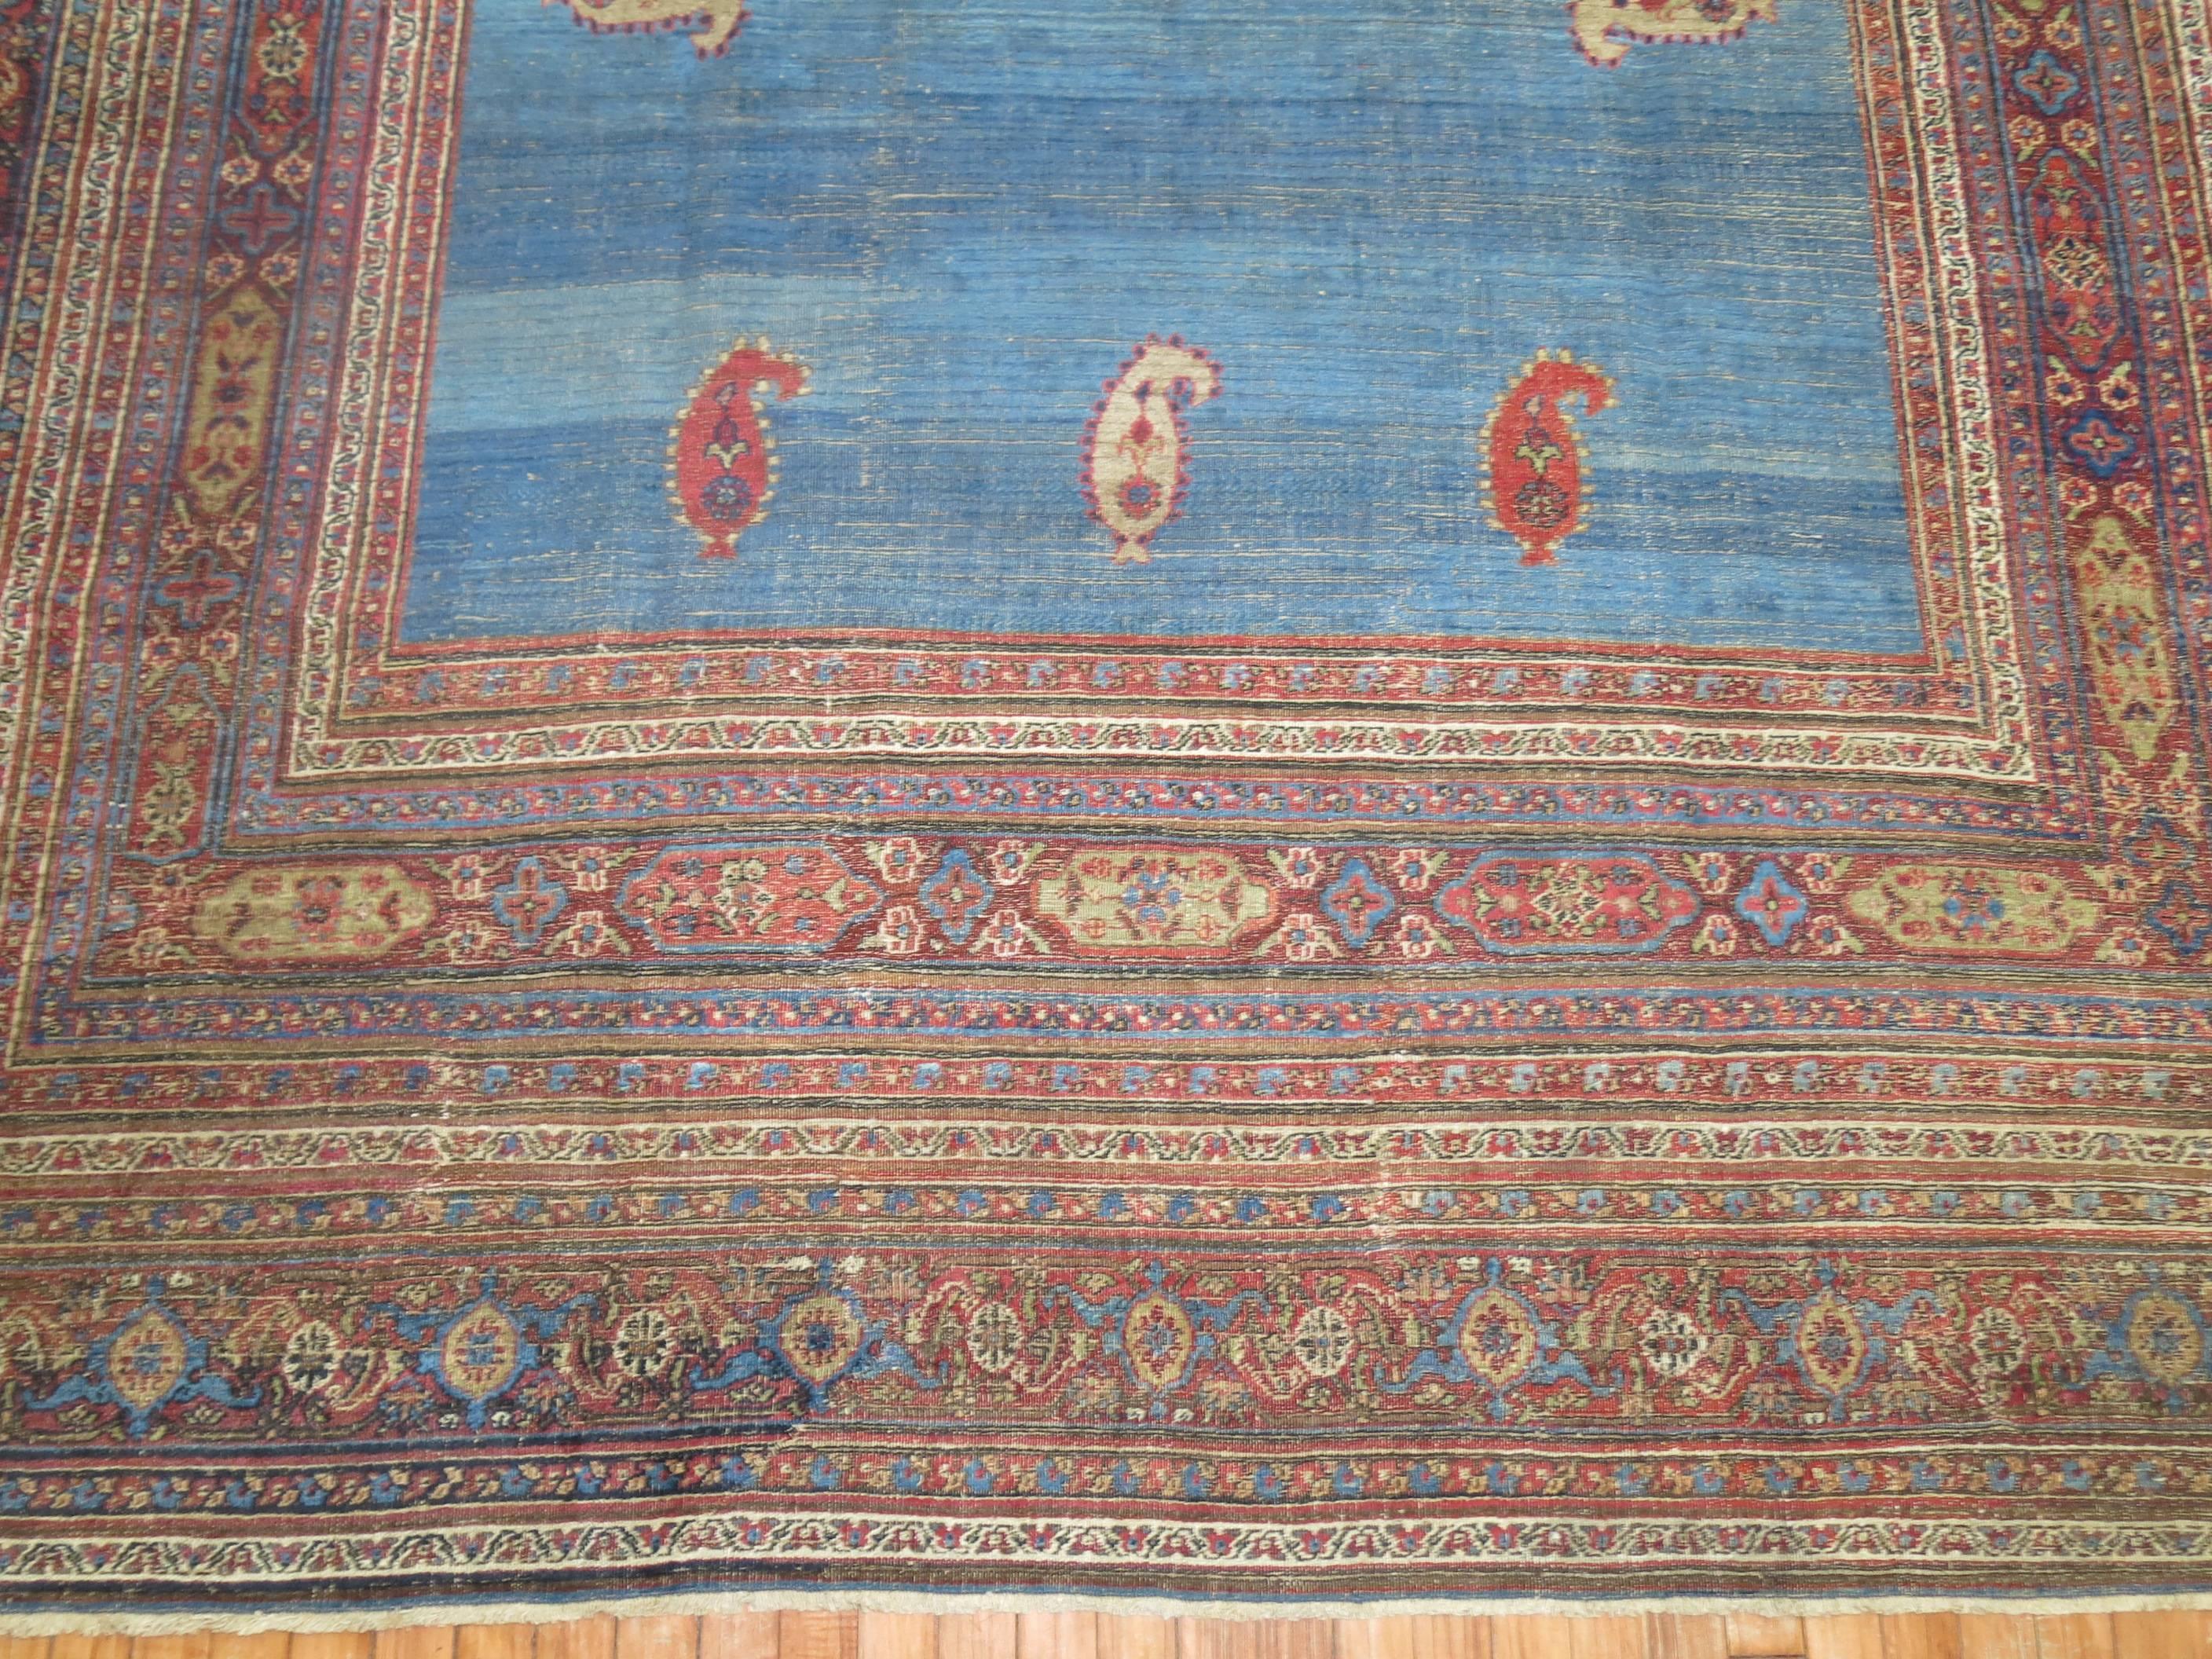 Unique Persian Doroksh carpet with multiple boteh motifs on a solid sky blue ground encased by multiple borders.

Antique Dorokhsh carpets are very much a decorator's carpet. Colors tend to be subtle and can often be of substantial size. This